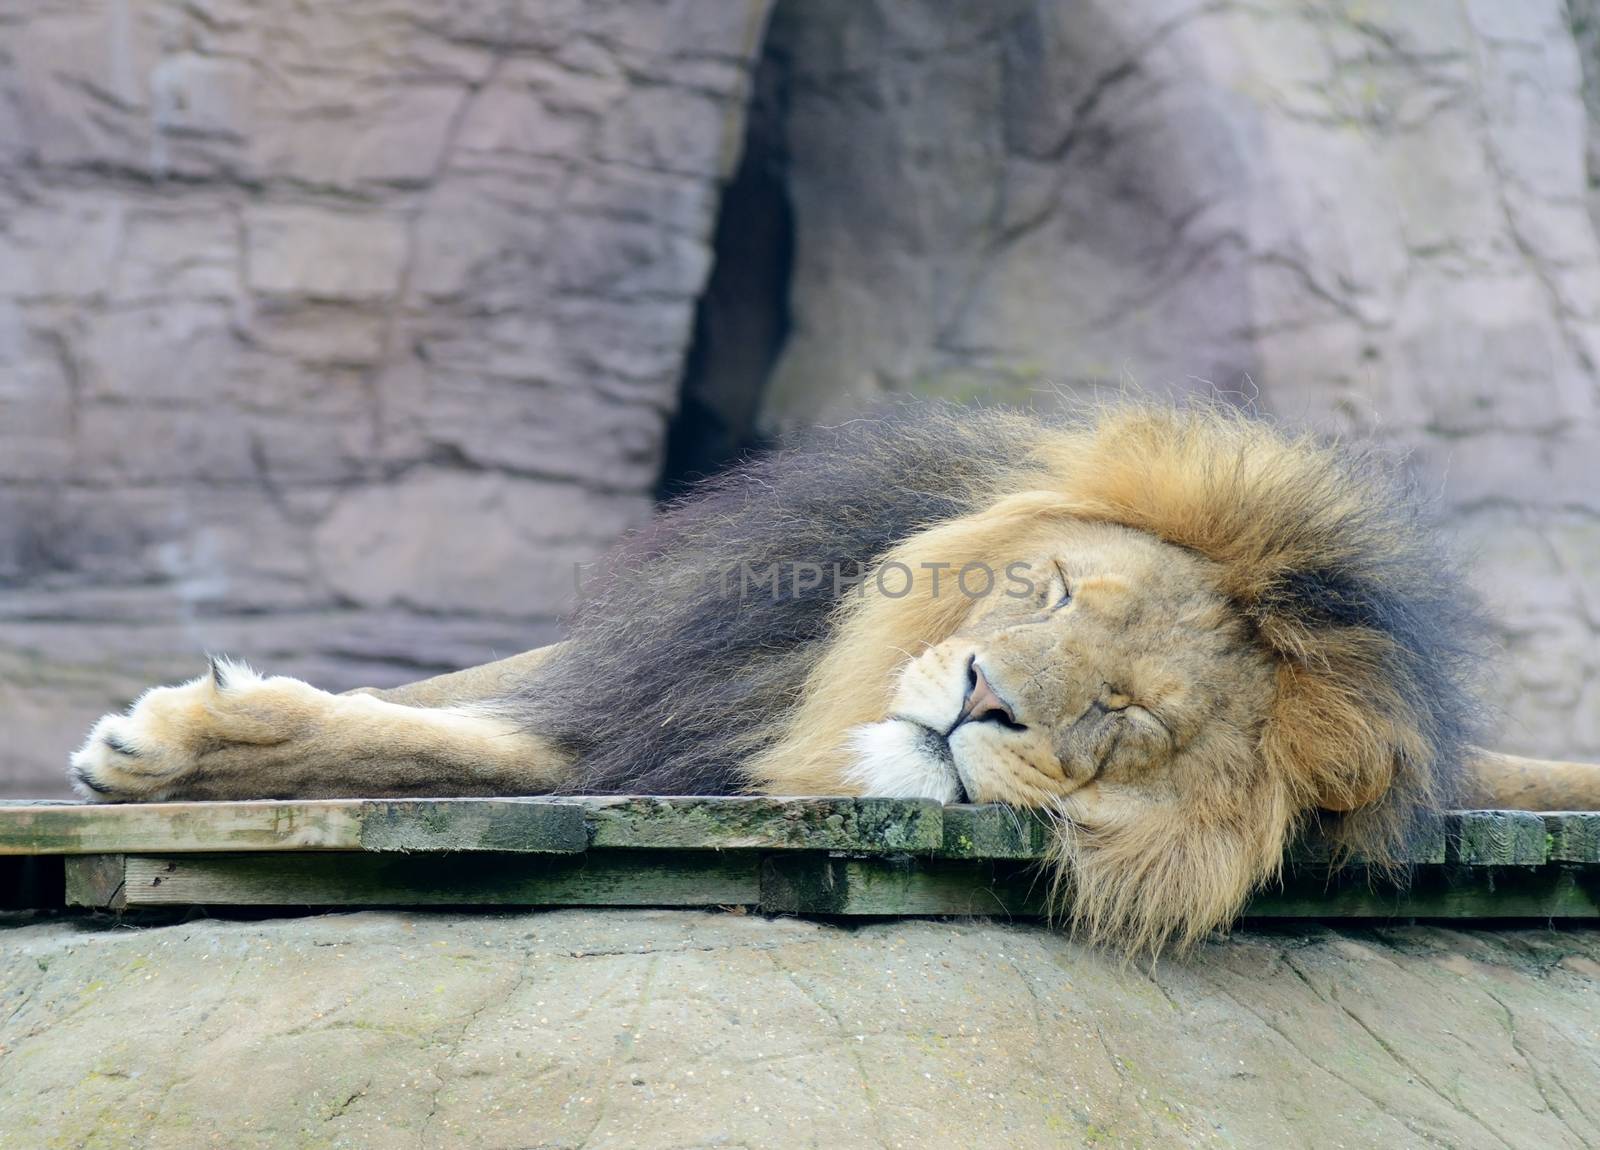 Lion sleeping by kmwphotography